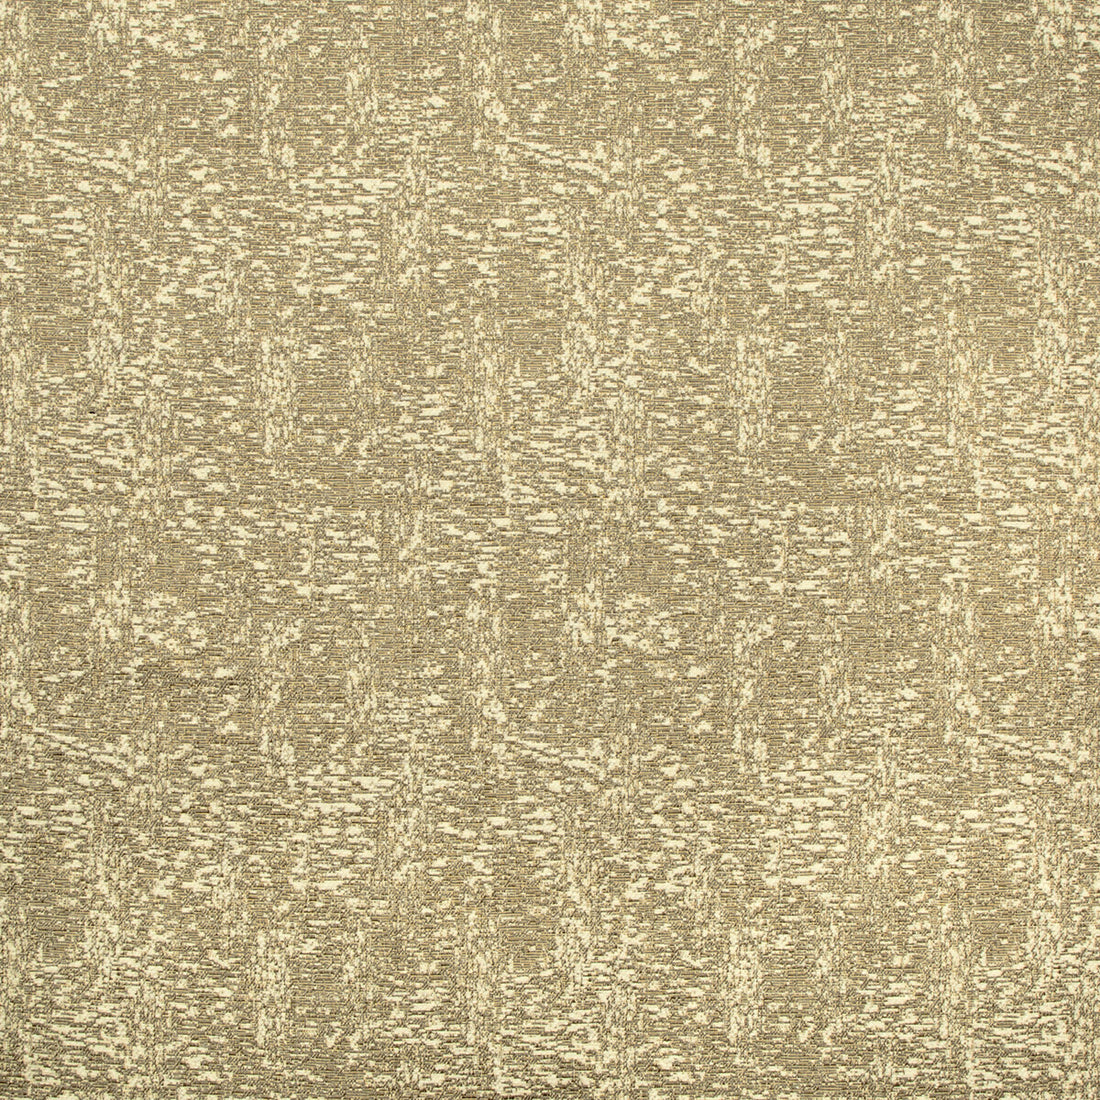 Stigmata fabric in sand color - pattern 2019146.16.0 - by Lee Jofa Modern in the Kw Terra Firma III Indoor Outdoor collection